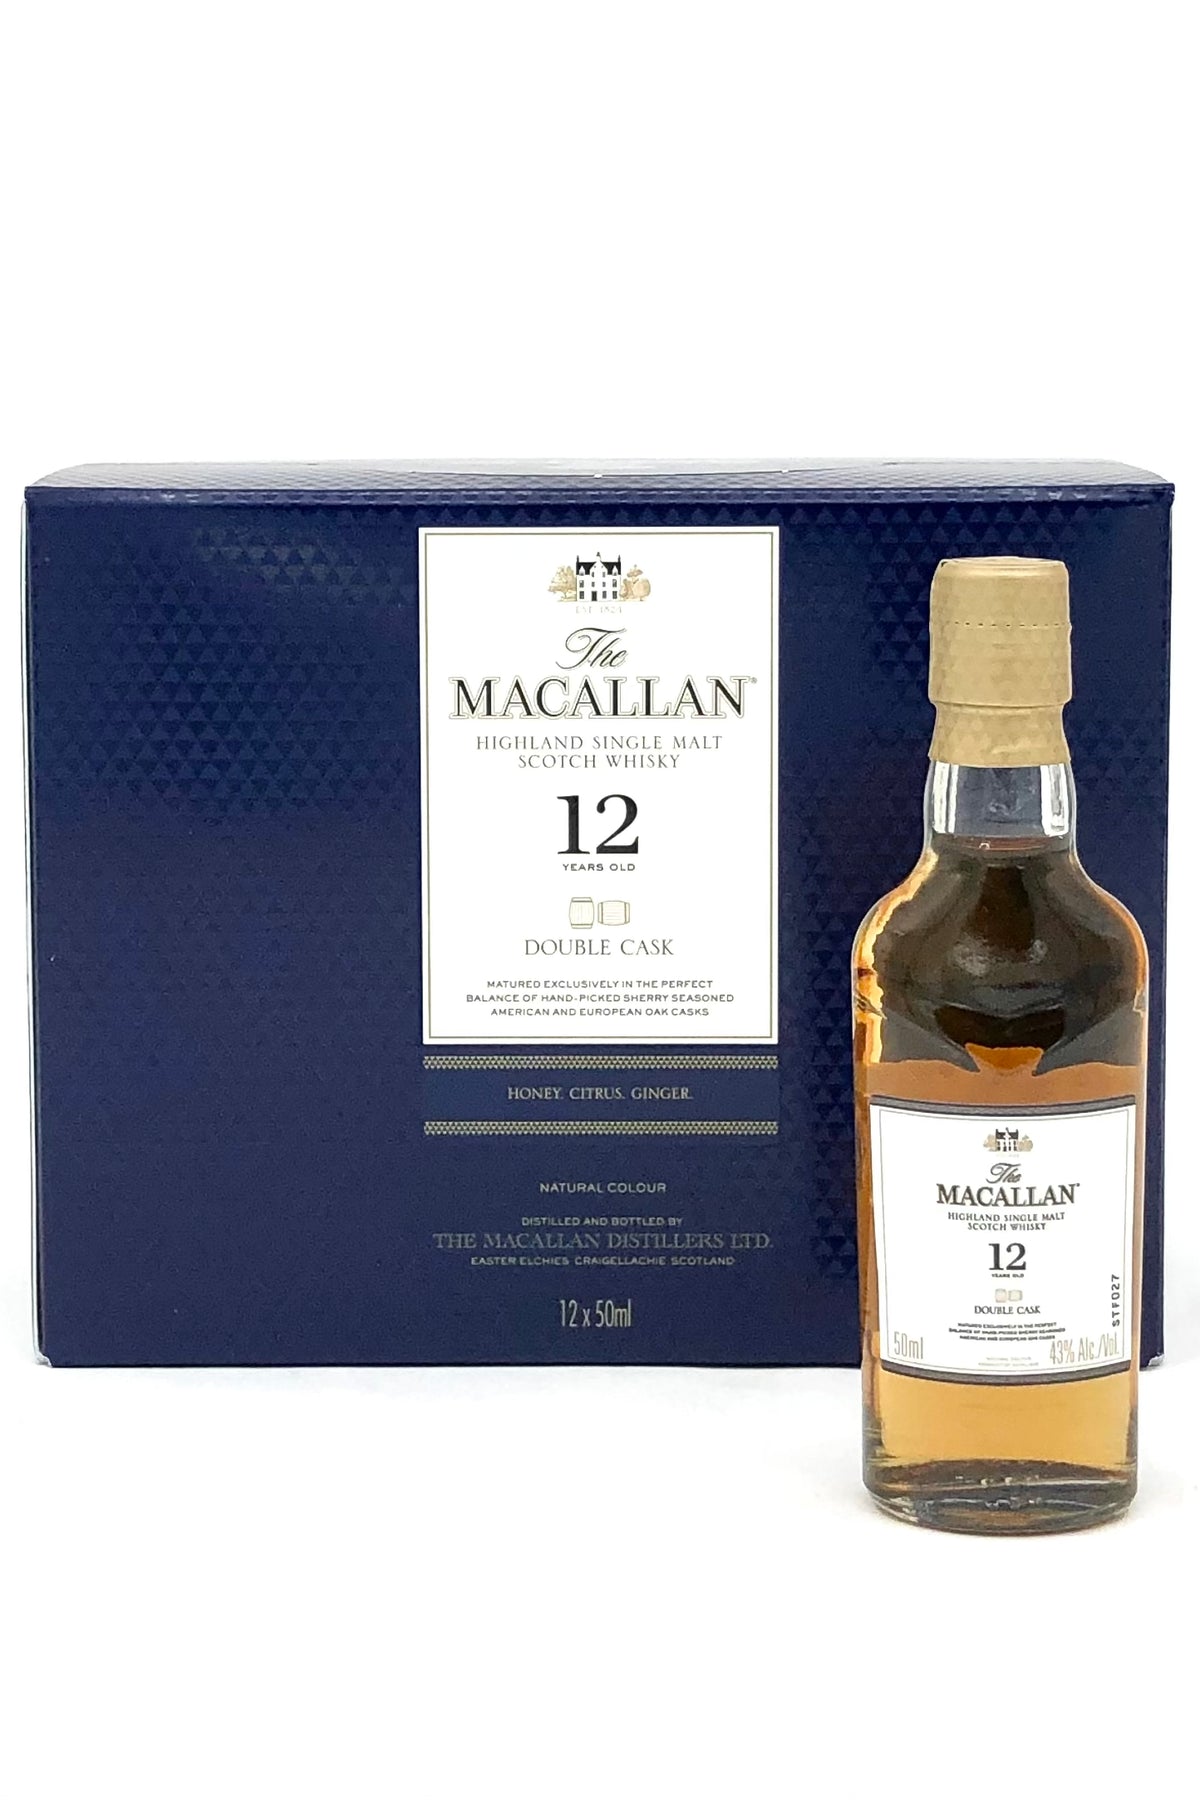 Macallan 12 Year Old Double Cask Scotch Whisky 12 x 50 ml